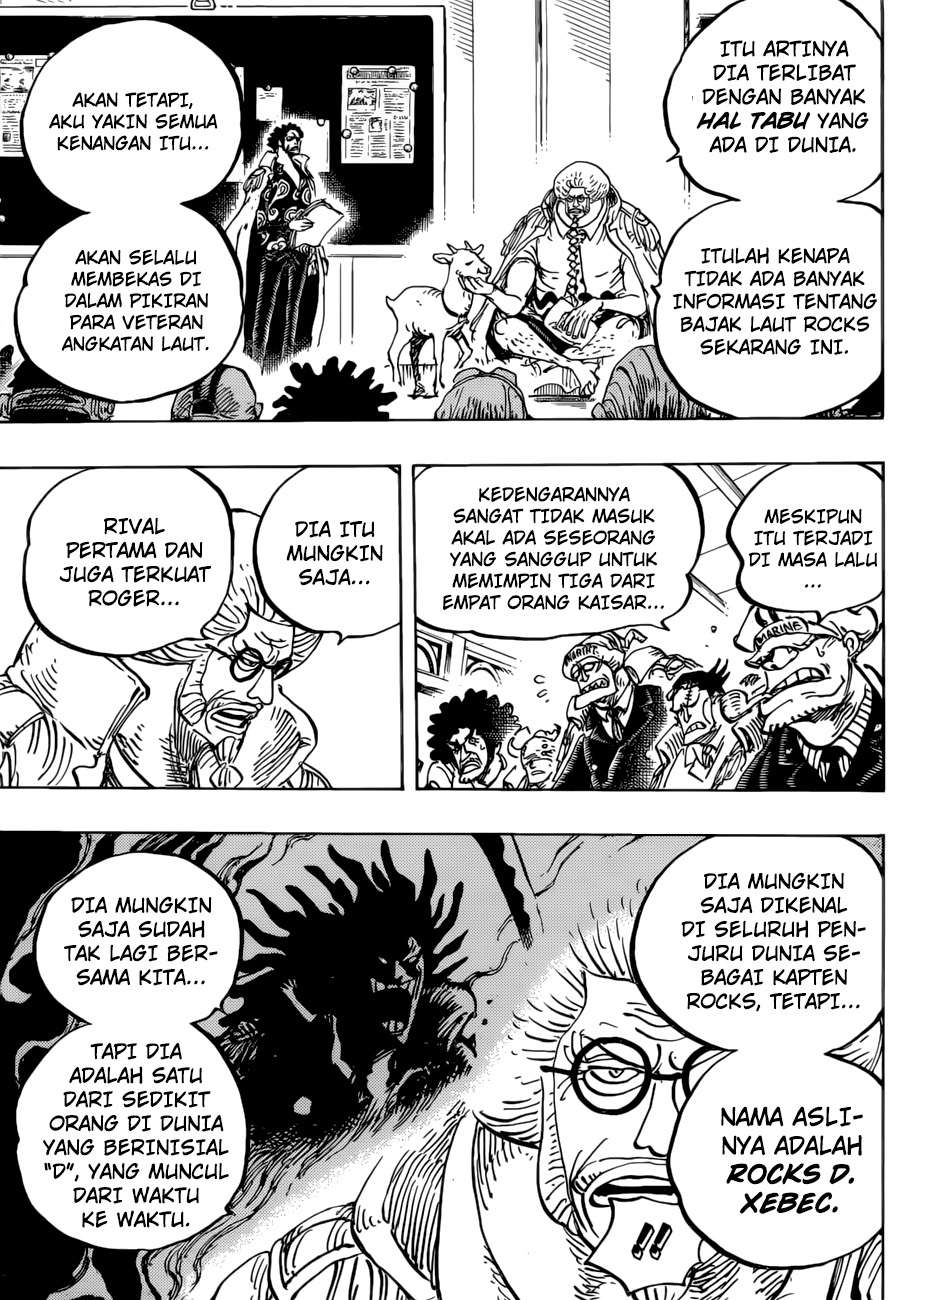 One Piece Chapter 957 12